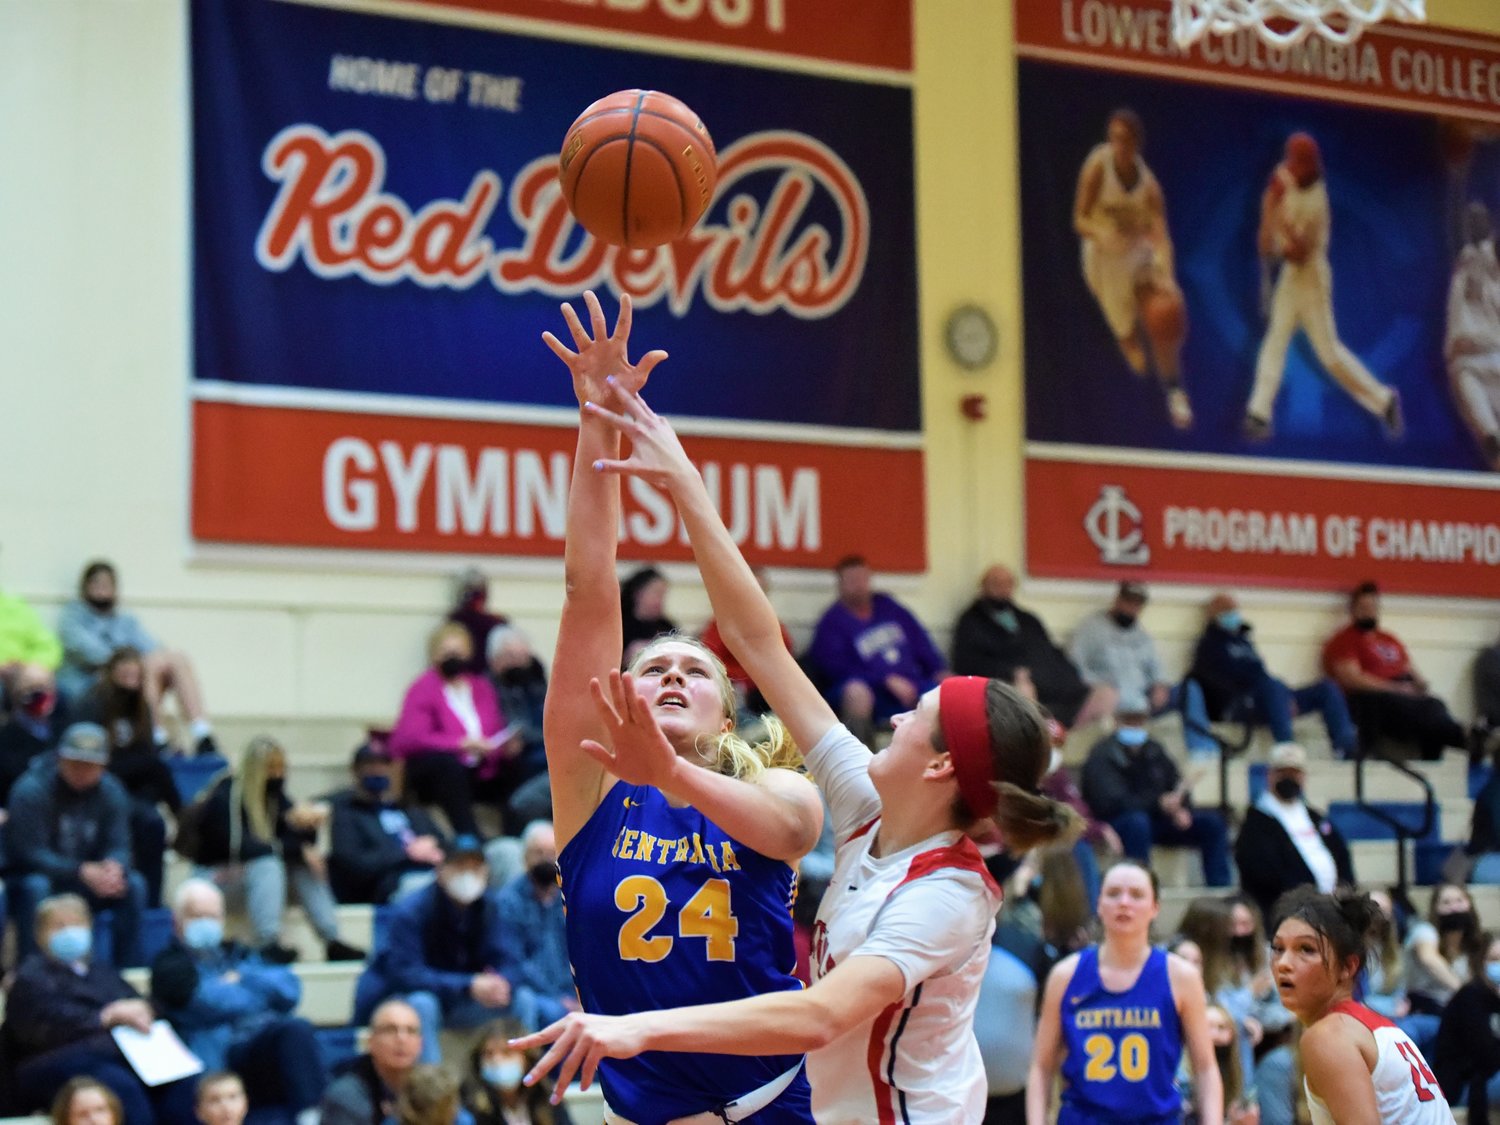 Centralia College's Paige Winter throws up a shot against Lower Columbia College on Feb. 2.